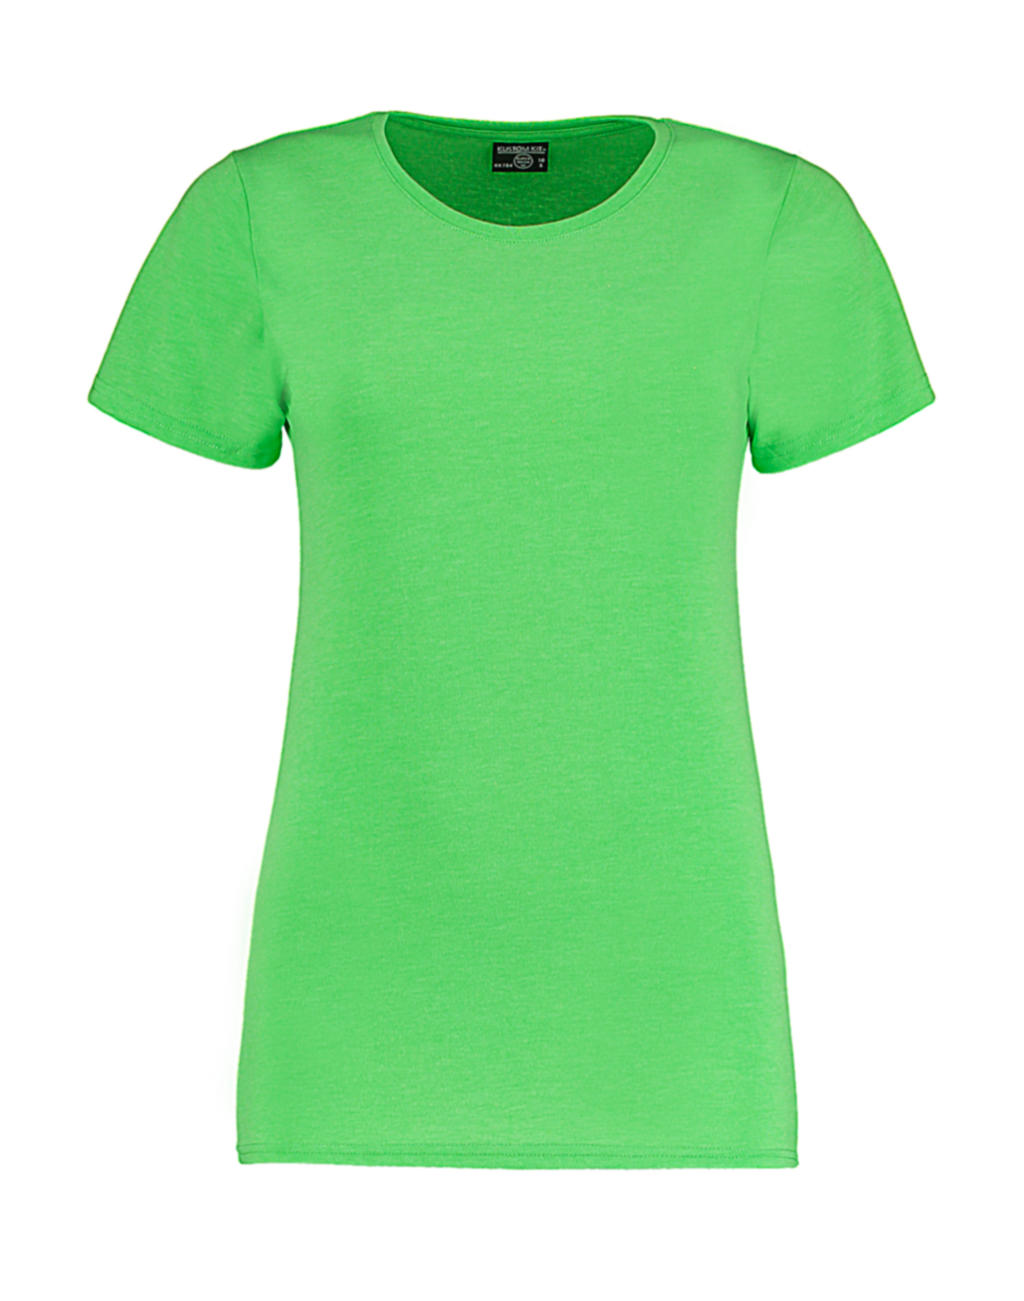  Womens Fashion Fit Superwash? 60? Tee in Farbe Lime Marl